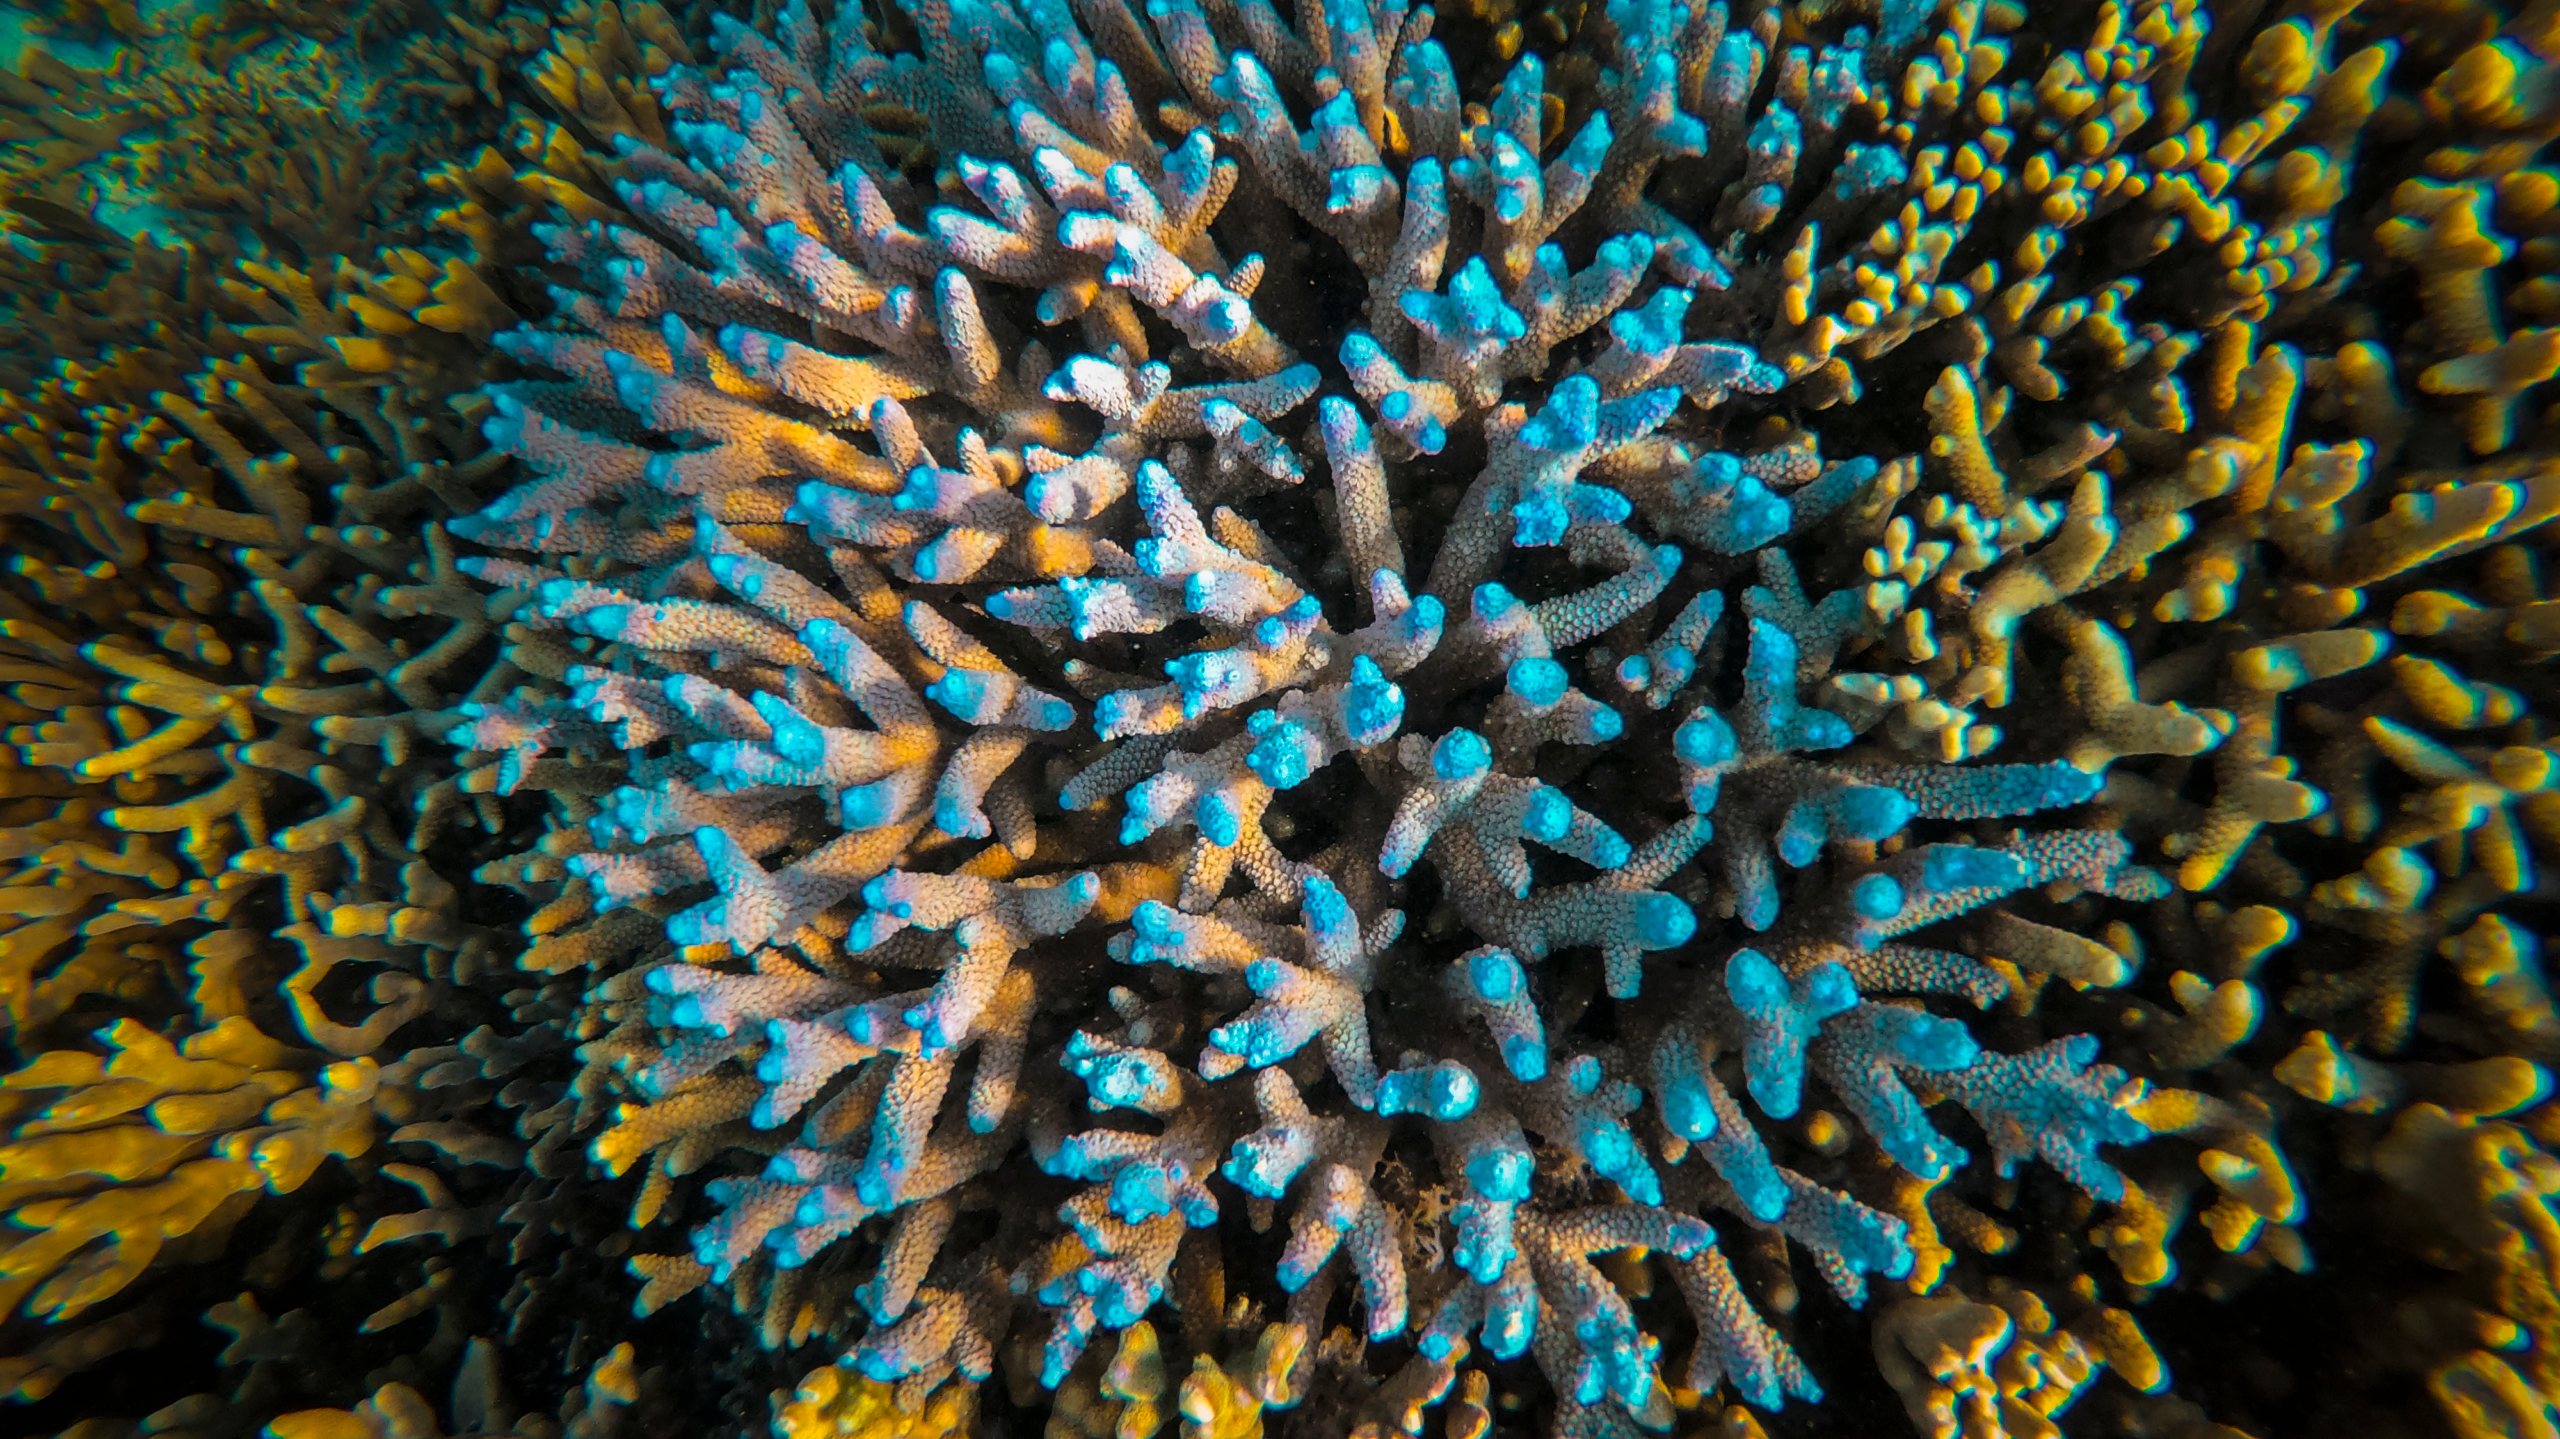 Corals at the reef at lady Elliot island.In the quest to